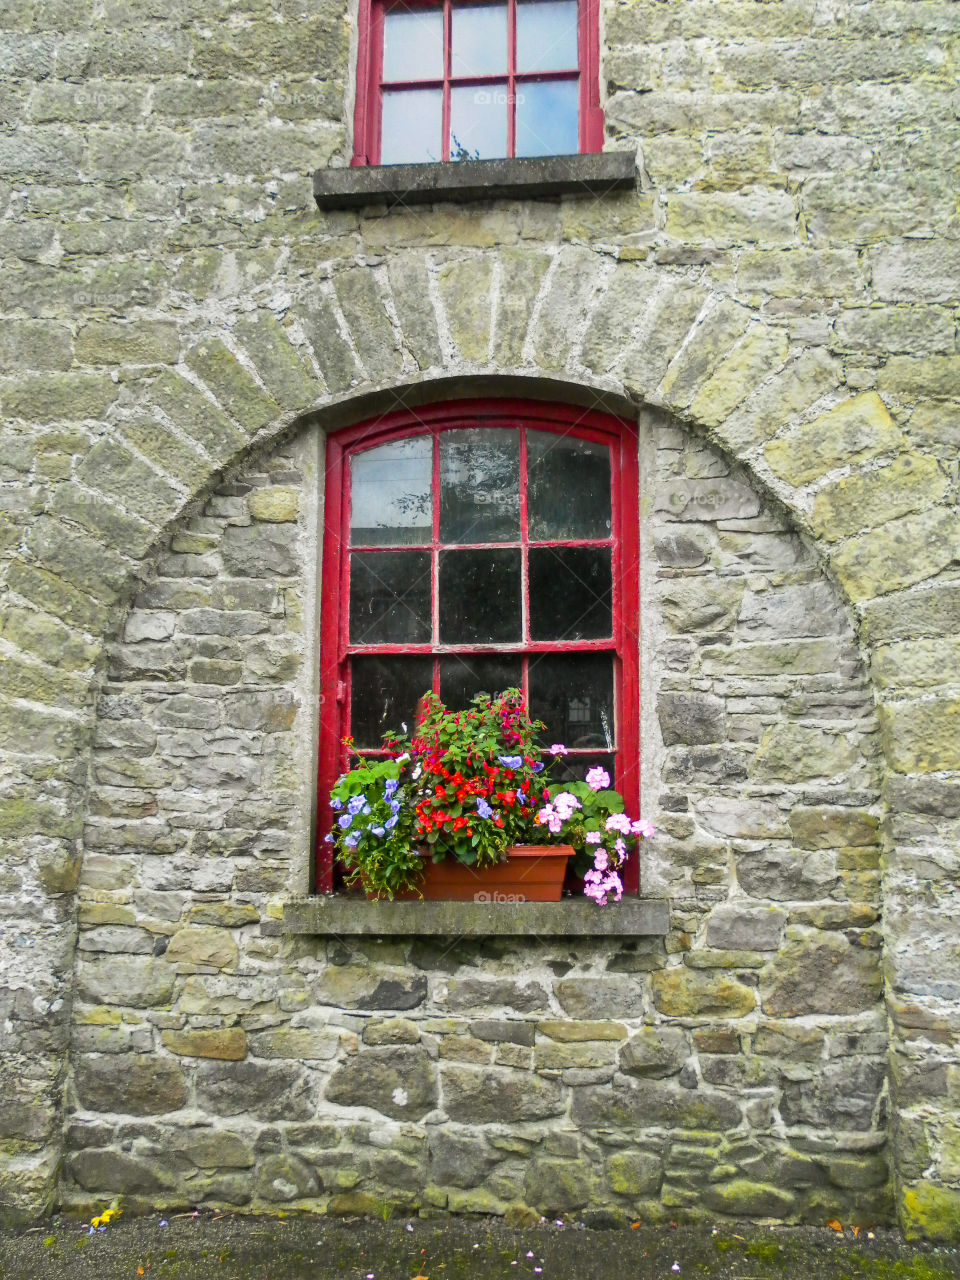 Stone wall with red window frames and flowers on the window sill. Shapes rectangles and squares in this architectural structure